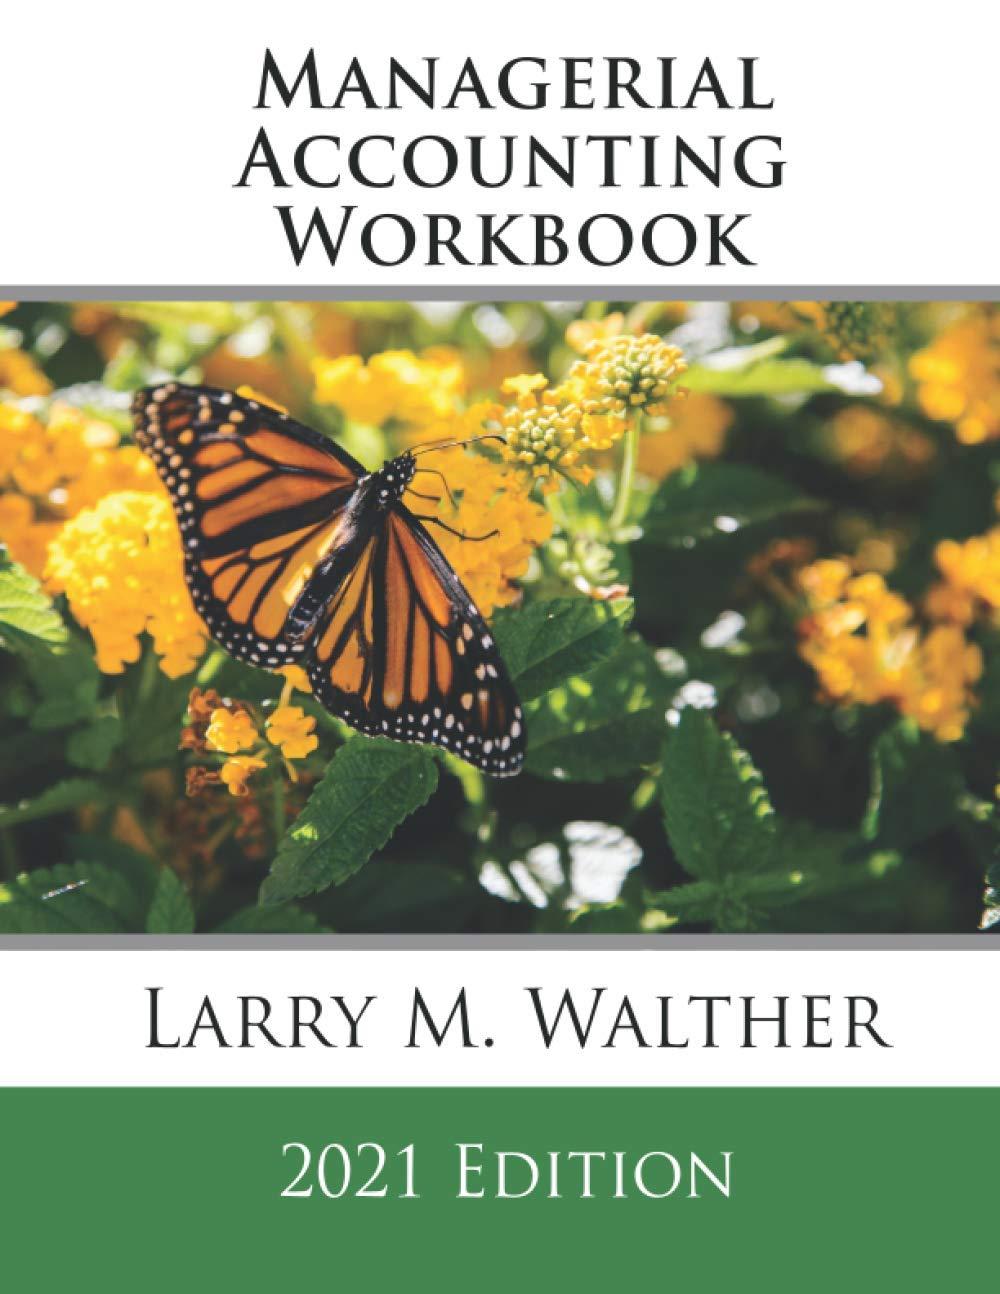 managerial accounting workbook 2021th edition larry m. walther 8550965689, 979-8550965689